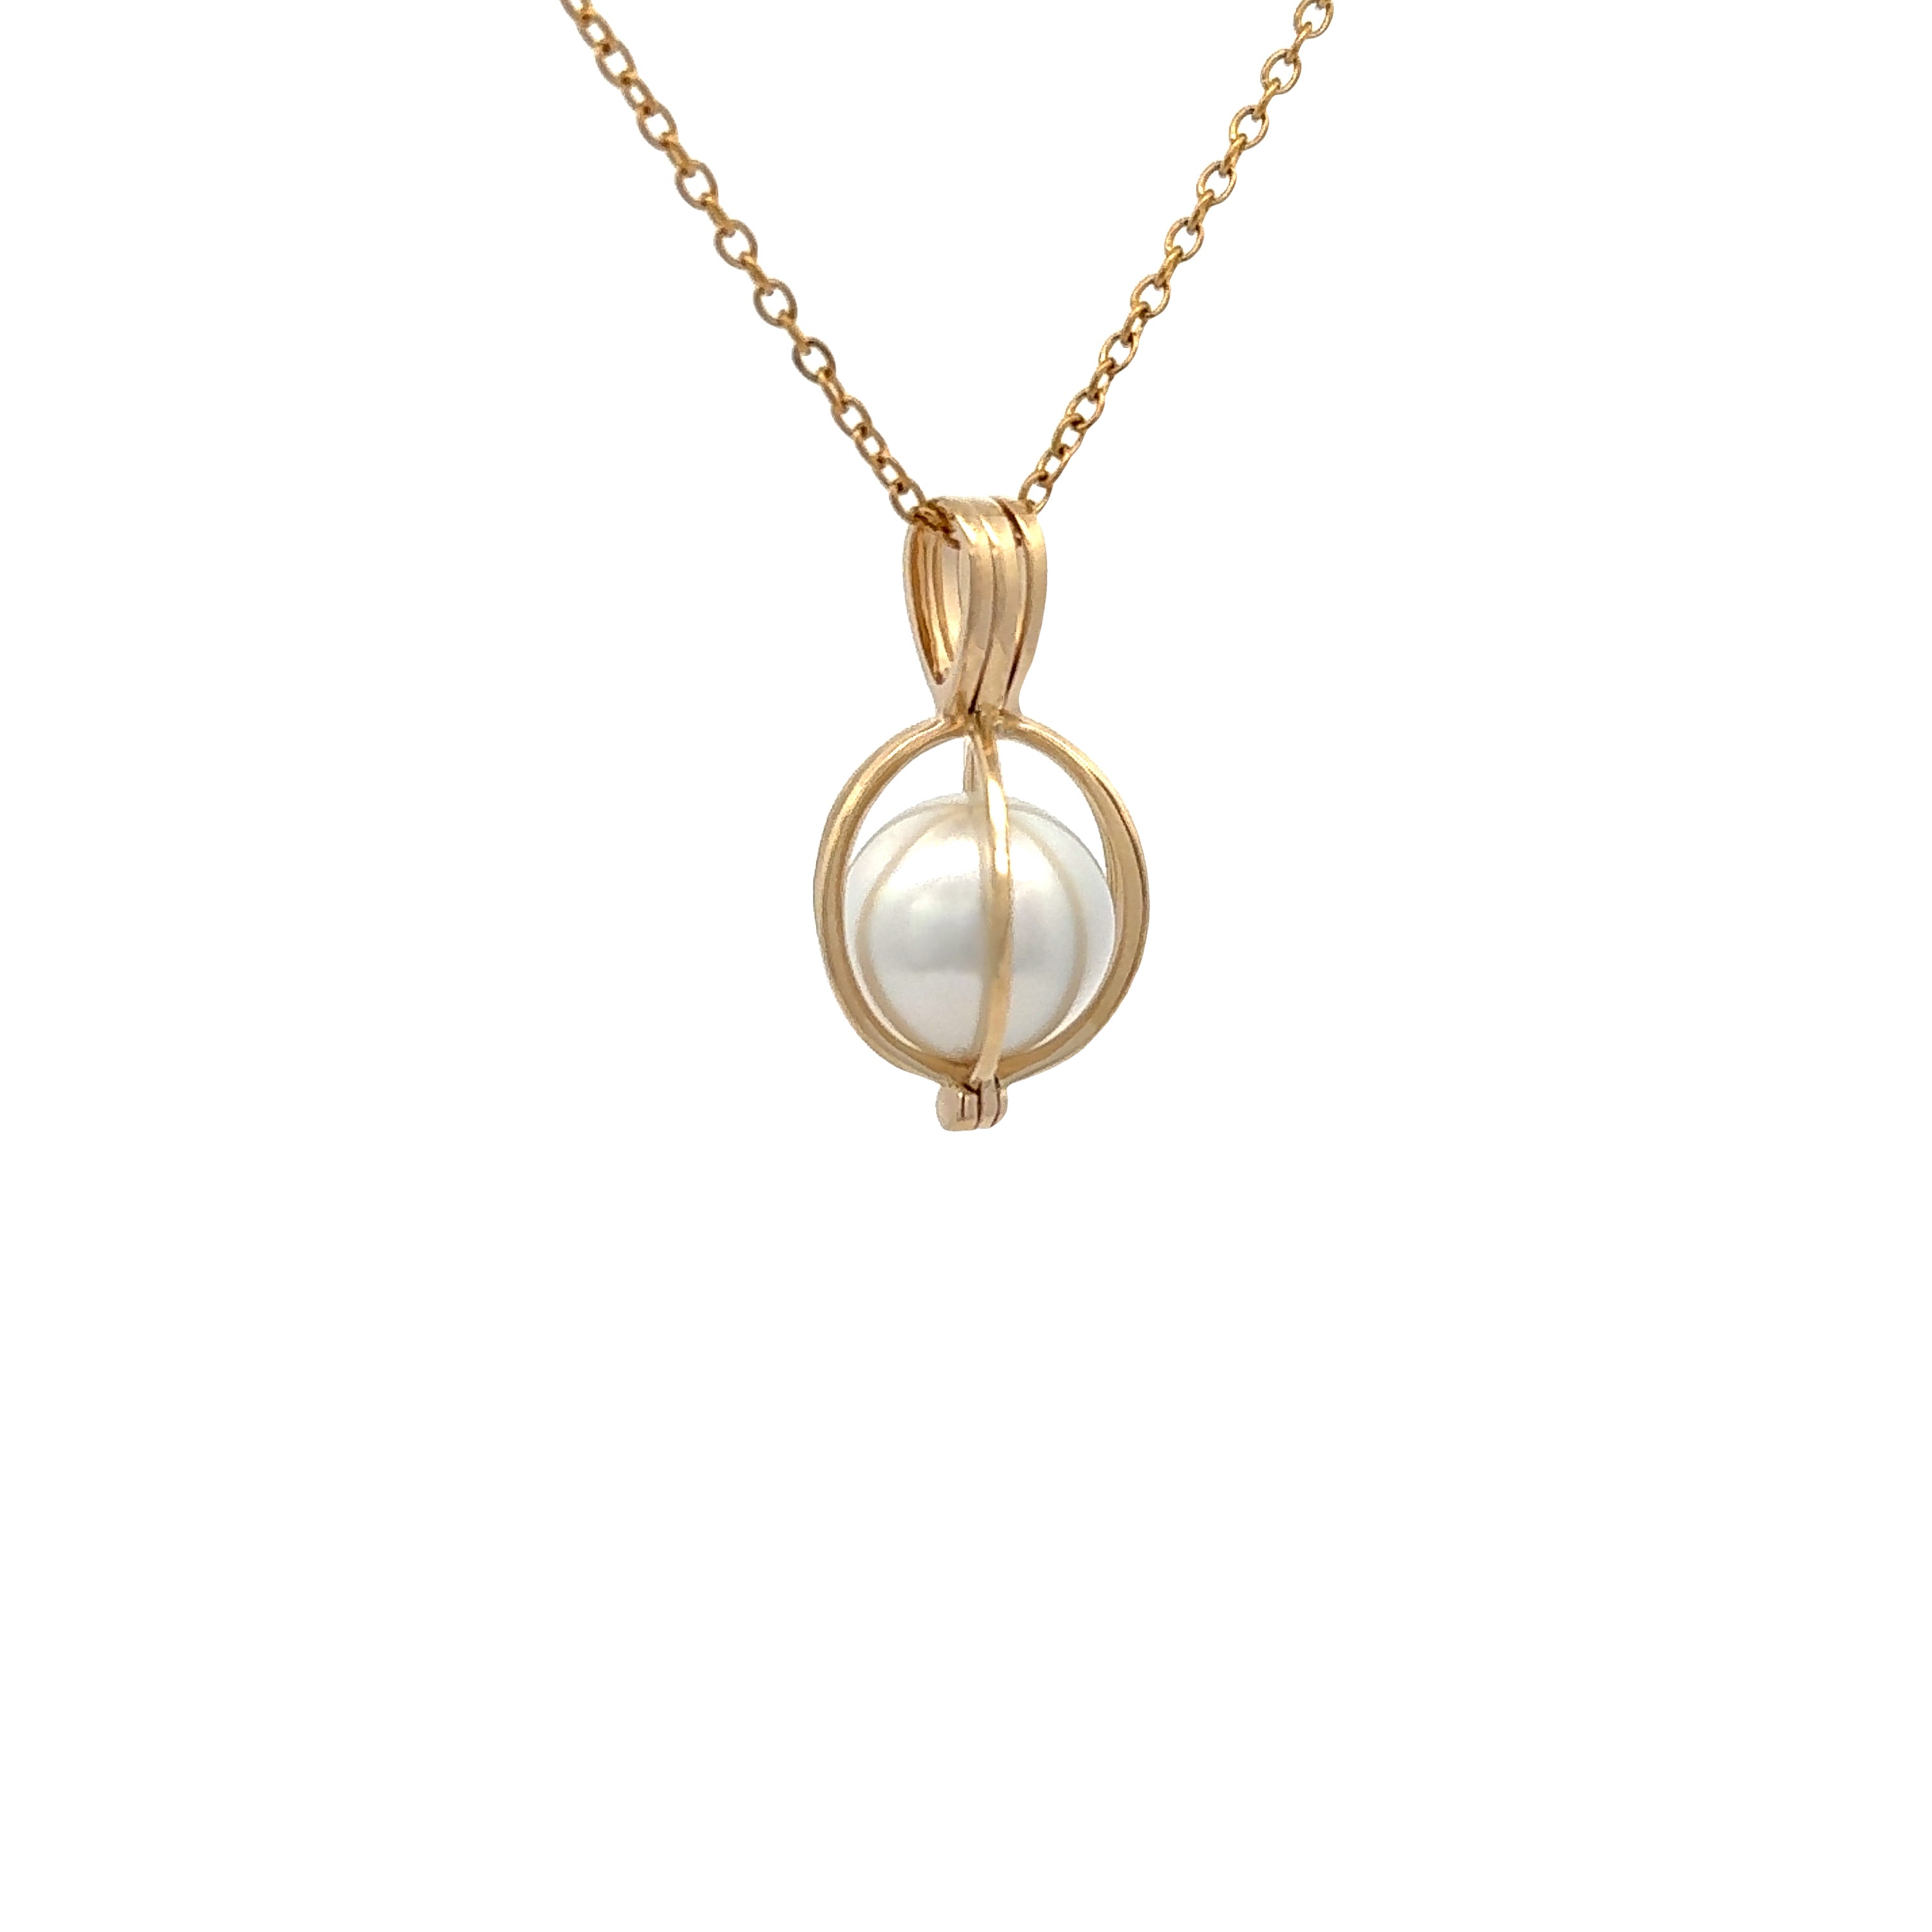 9K Yellow Gold Australian South Sea Cultured 11-12 mm Pearl Cage Pendant